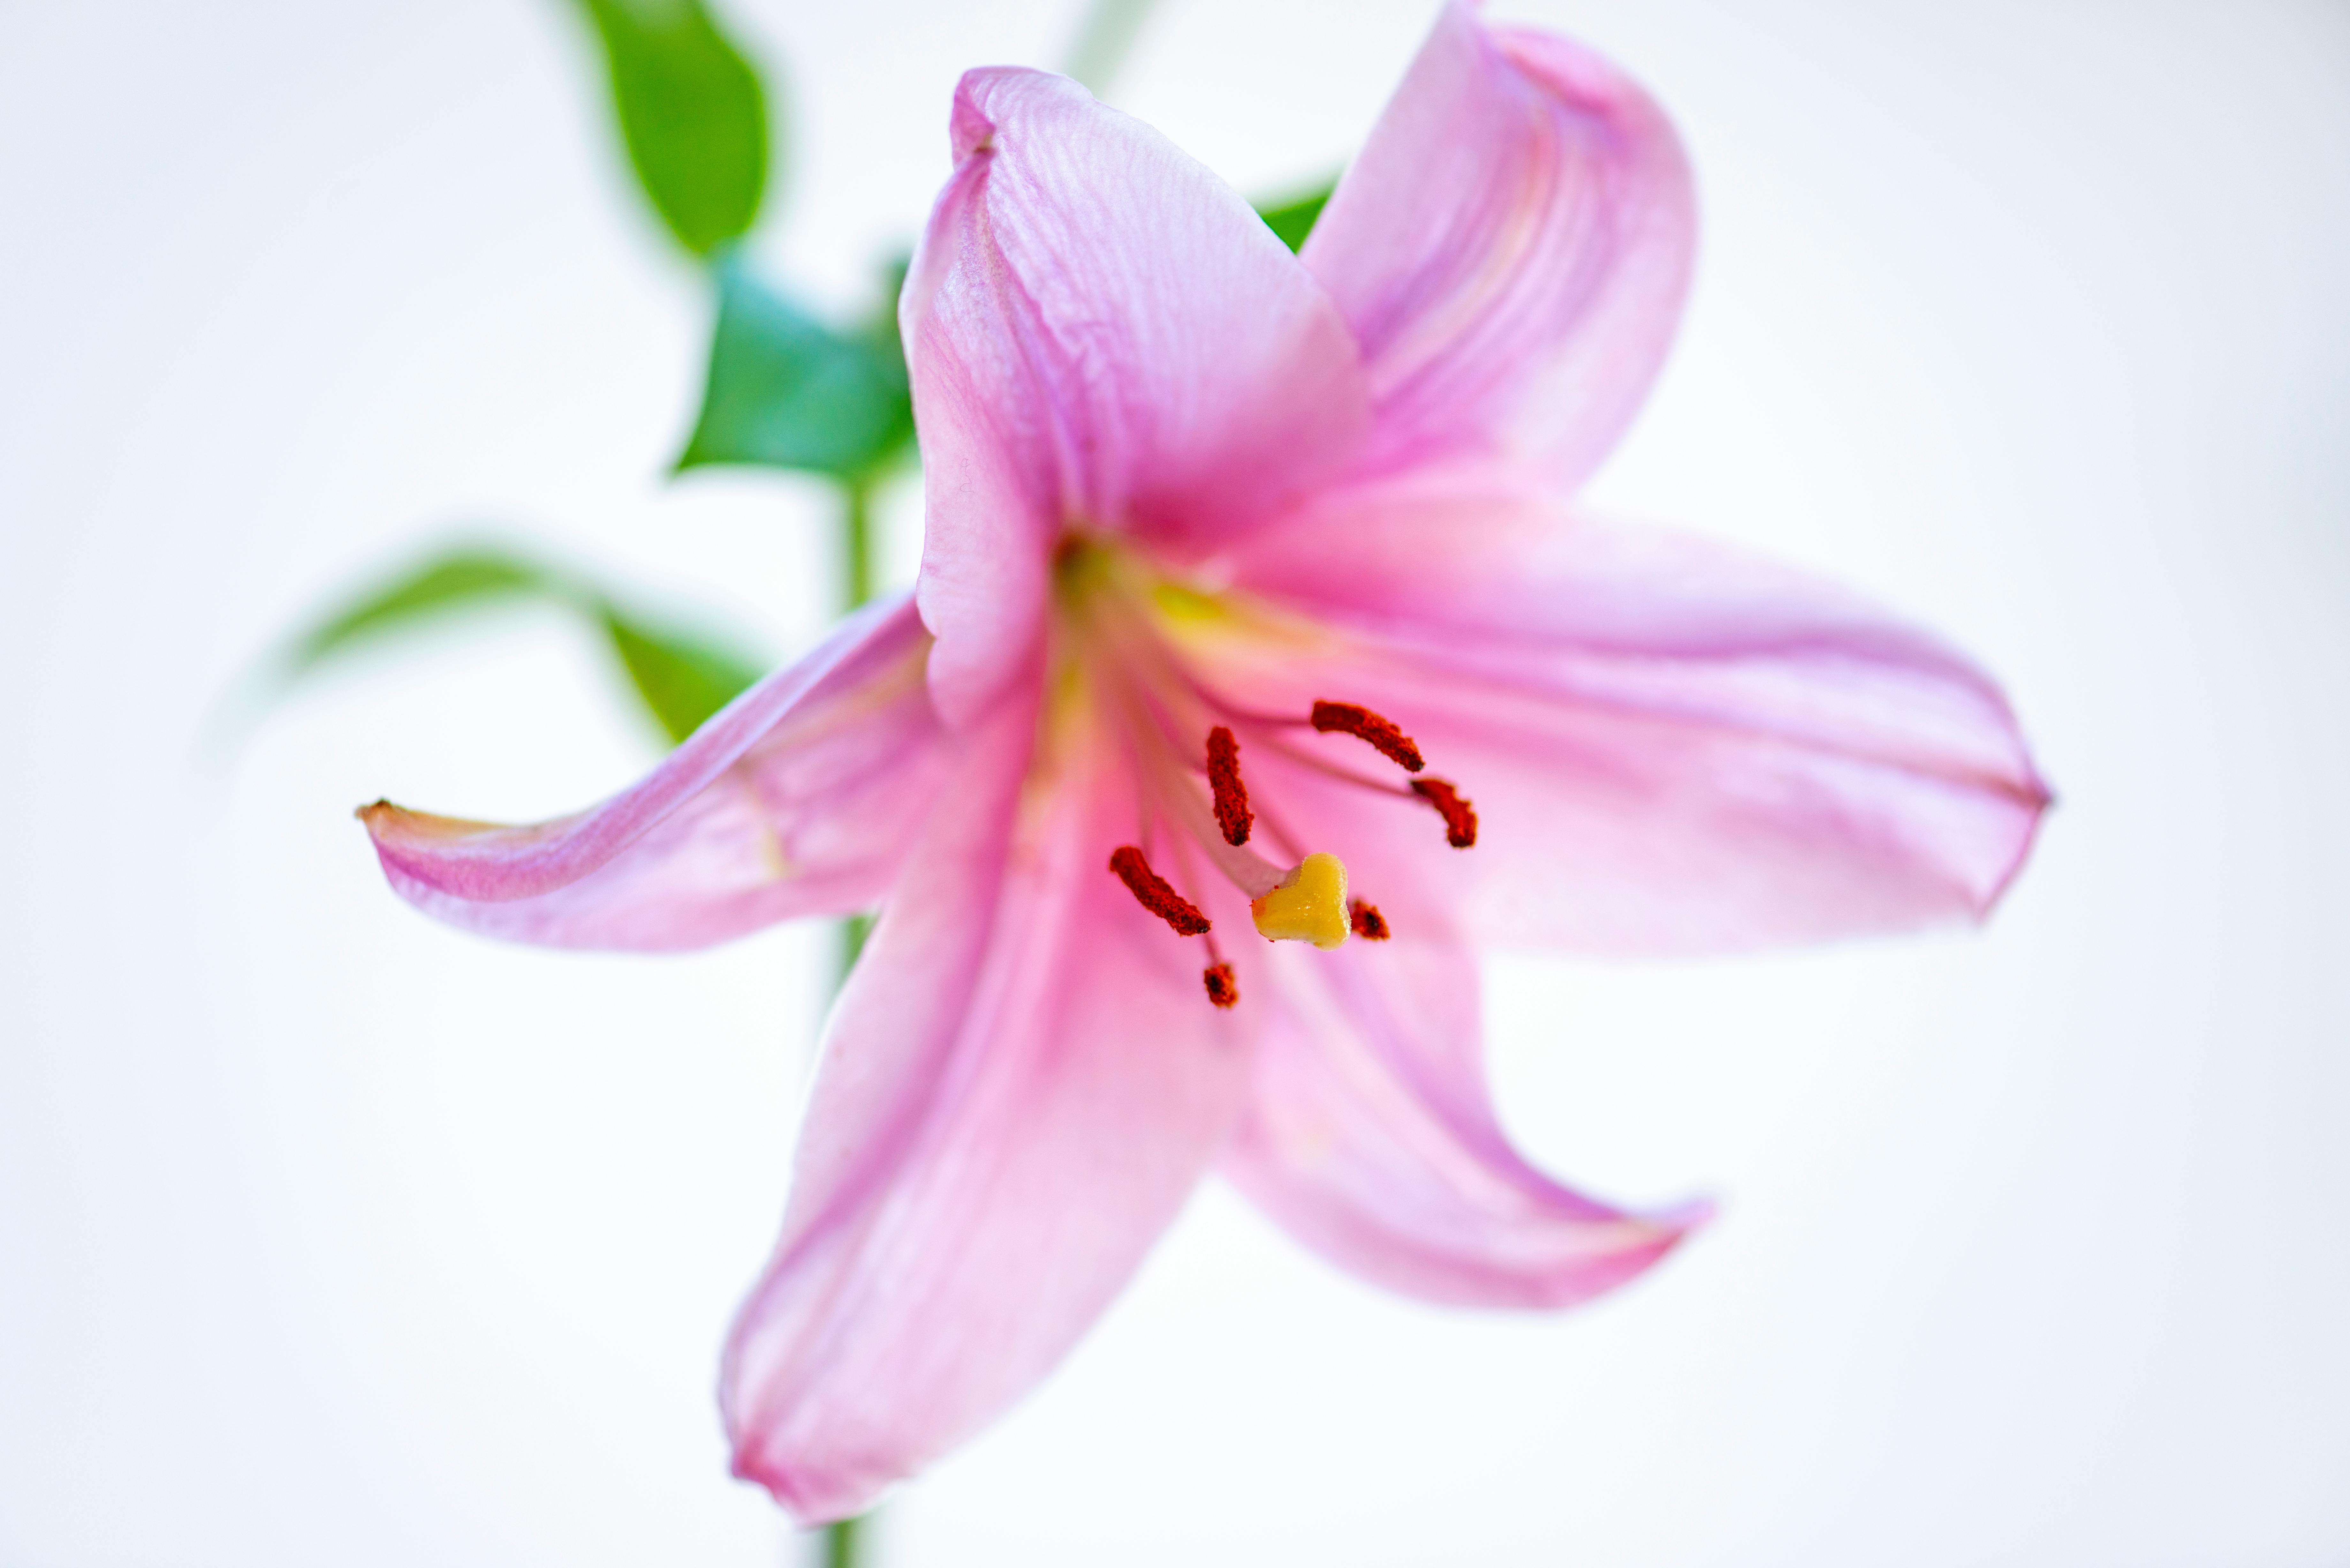 Fashion aesthetic Wallpaper Phone. Bloom Lily Flowers Background. Spring  Summer Romantic Mood Stock Photo, Picture and Royalty Free Image. Image  148837254.